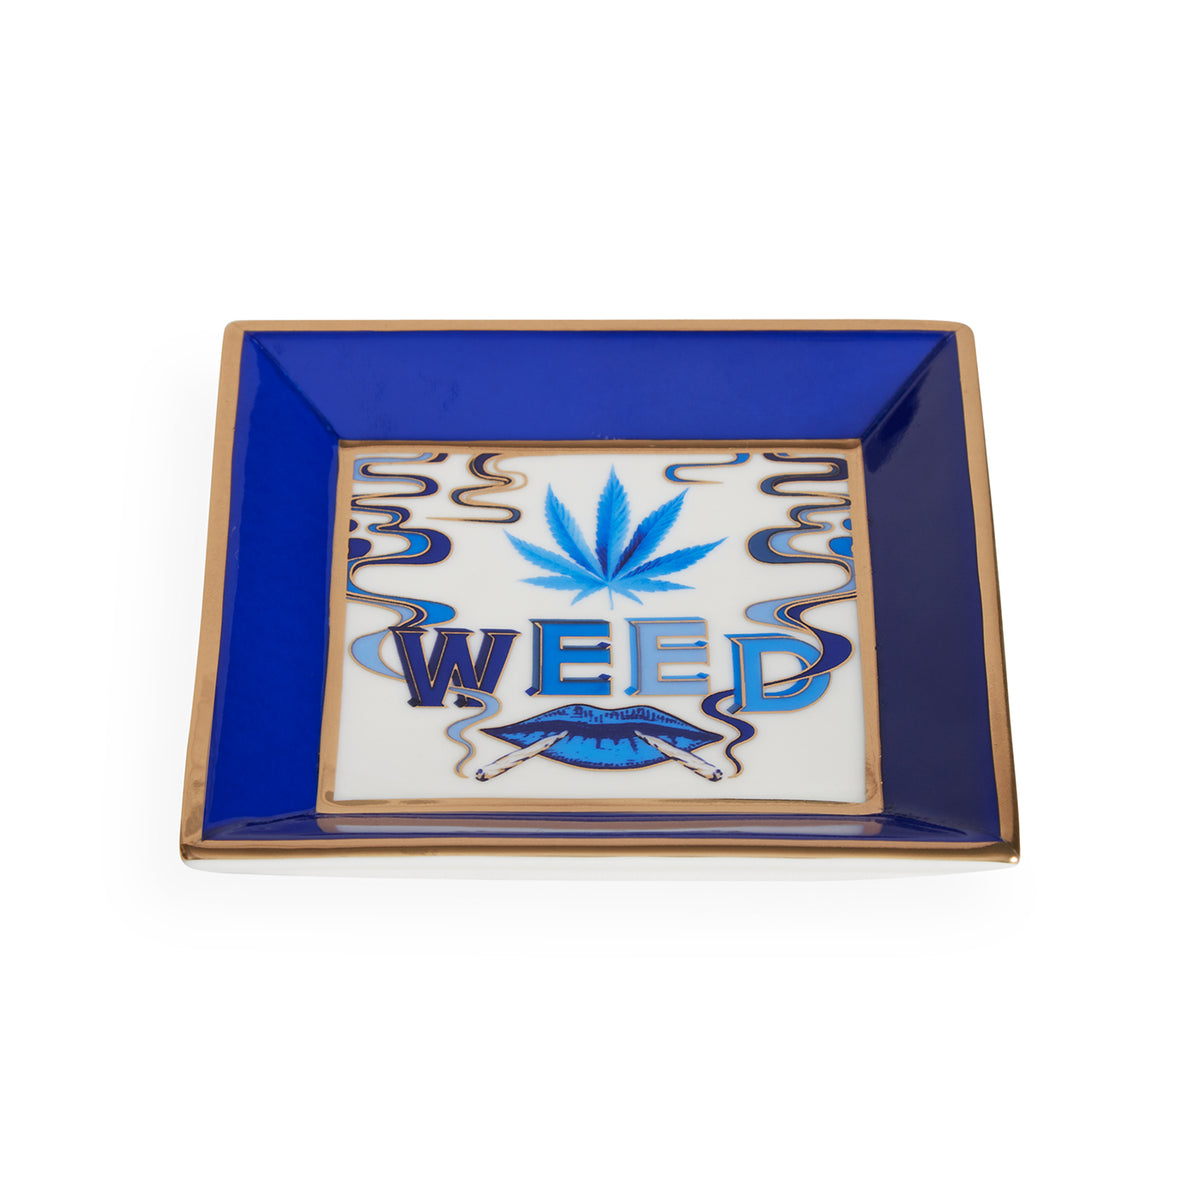 Druggist Weed Square Tray by Jonathan Adler